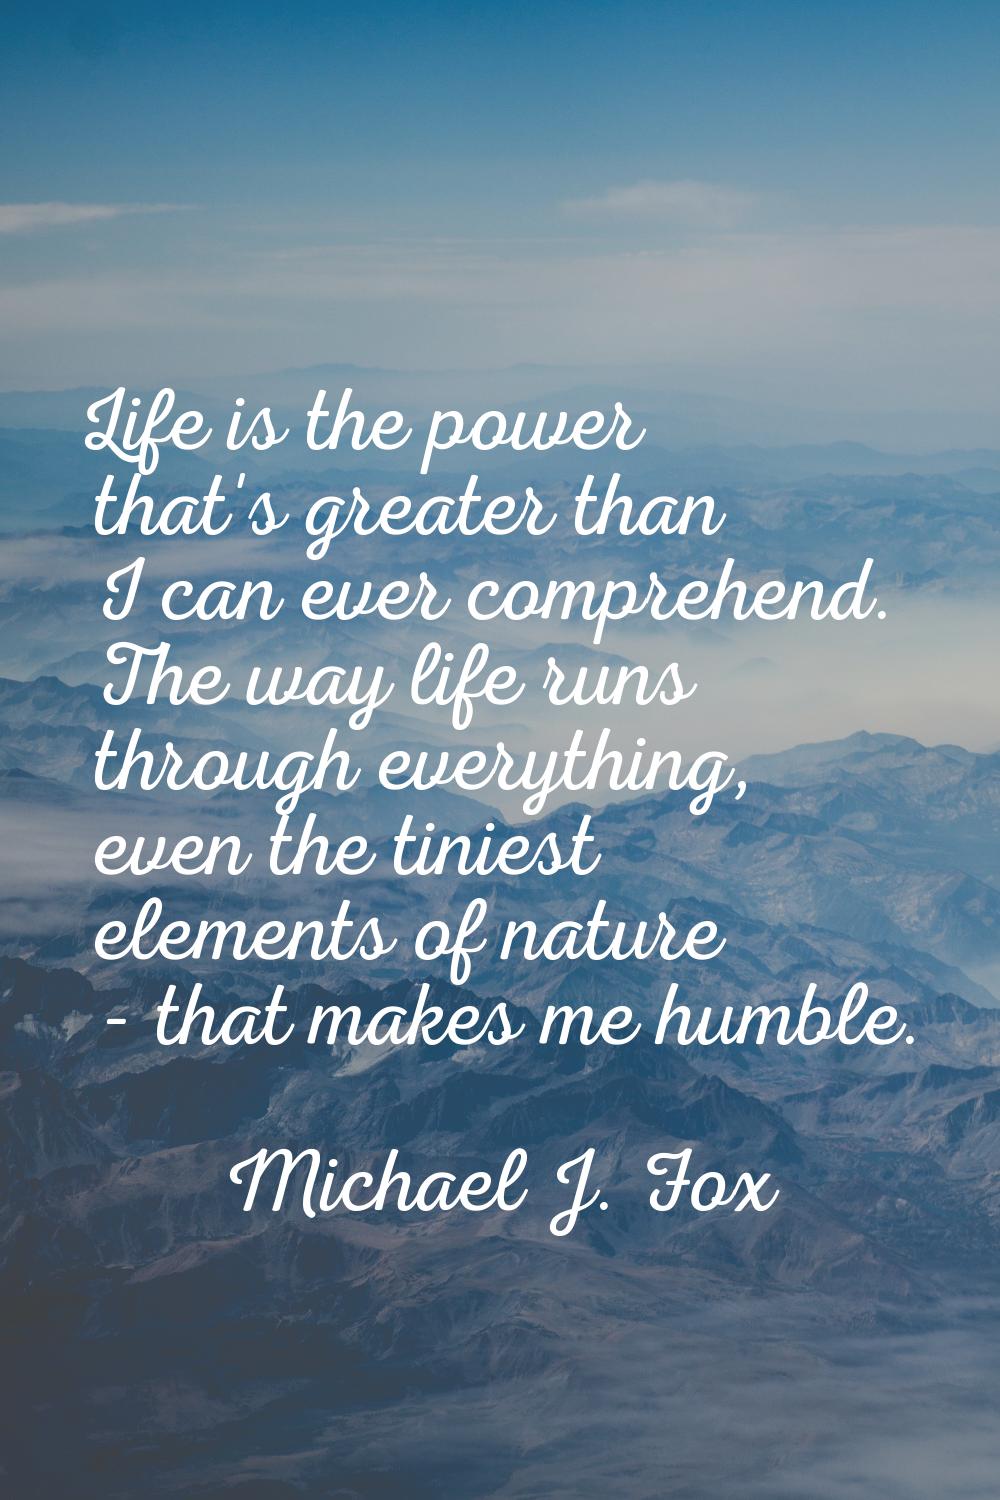 Life is the power that's greater than I can ever comprehend. The way life runs through everything, 